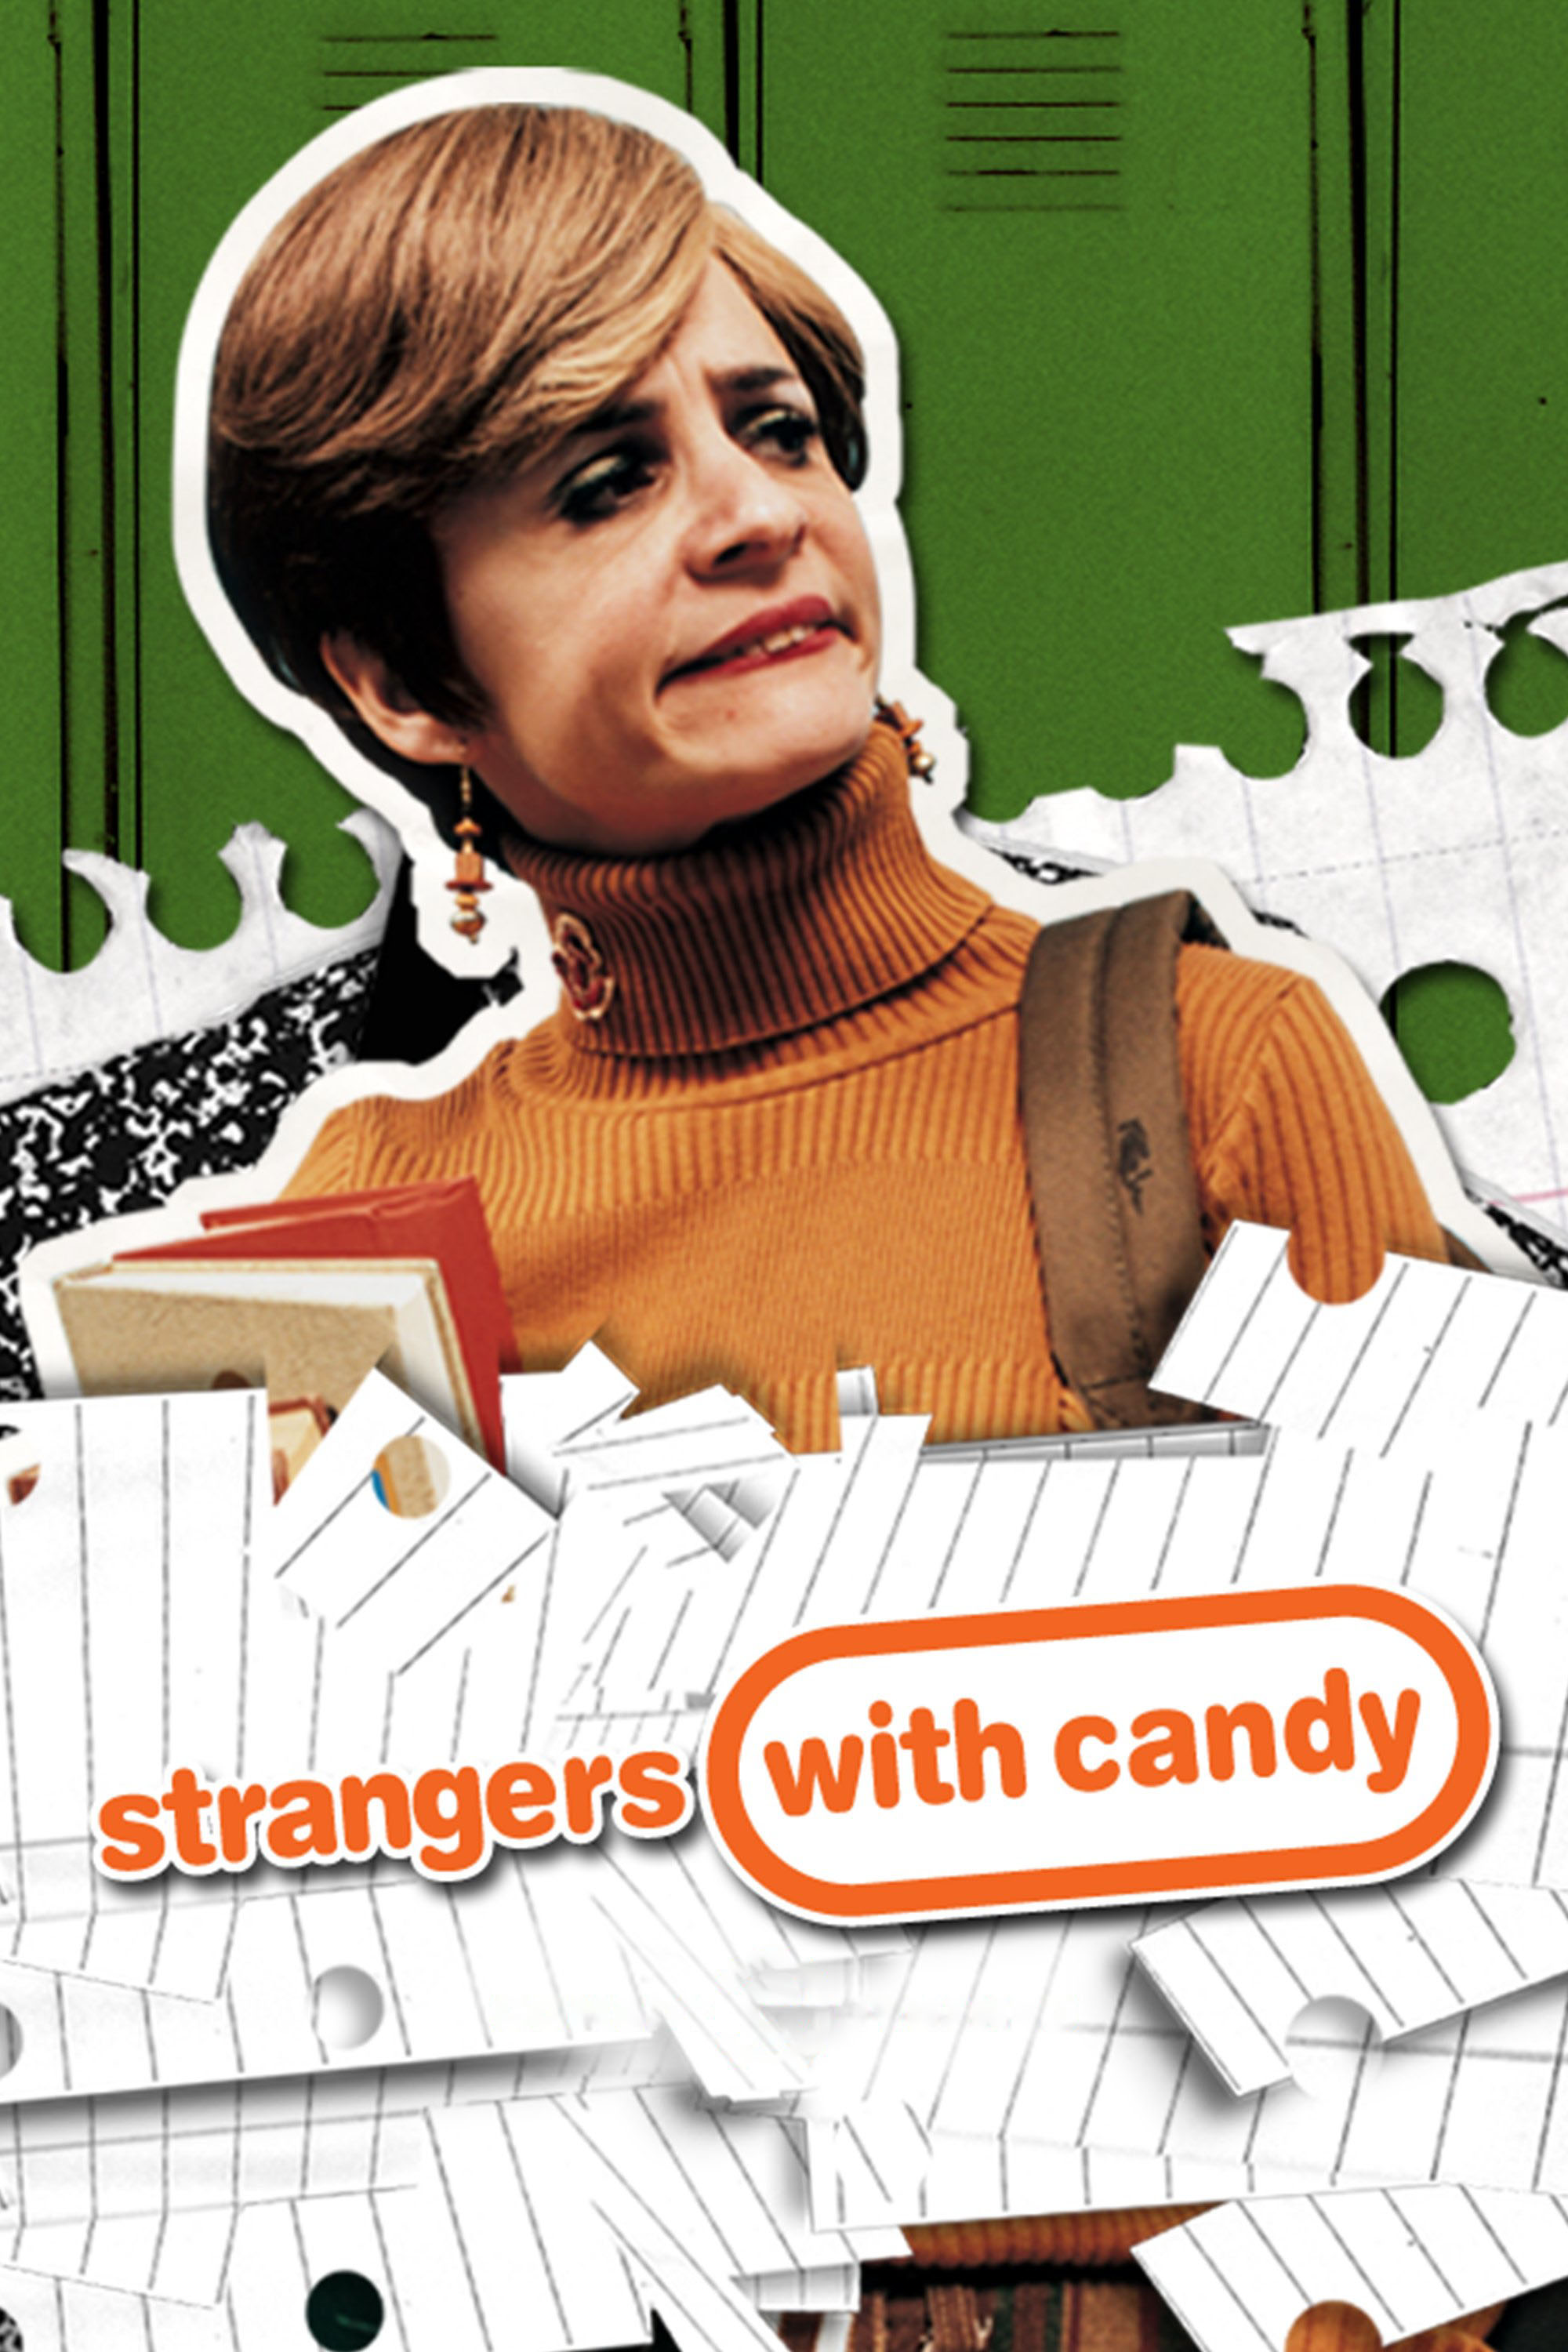 10 Famous Actors Who Appeared on 'Strangers with Candy